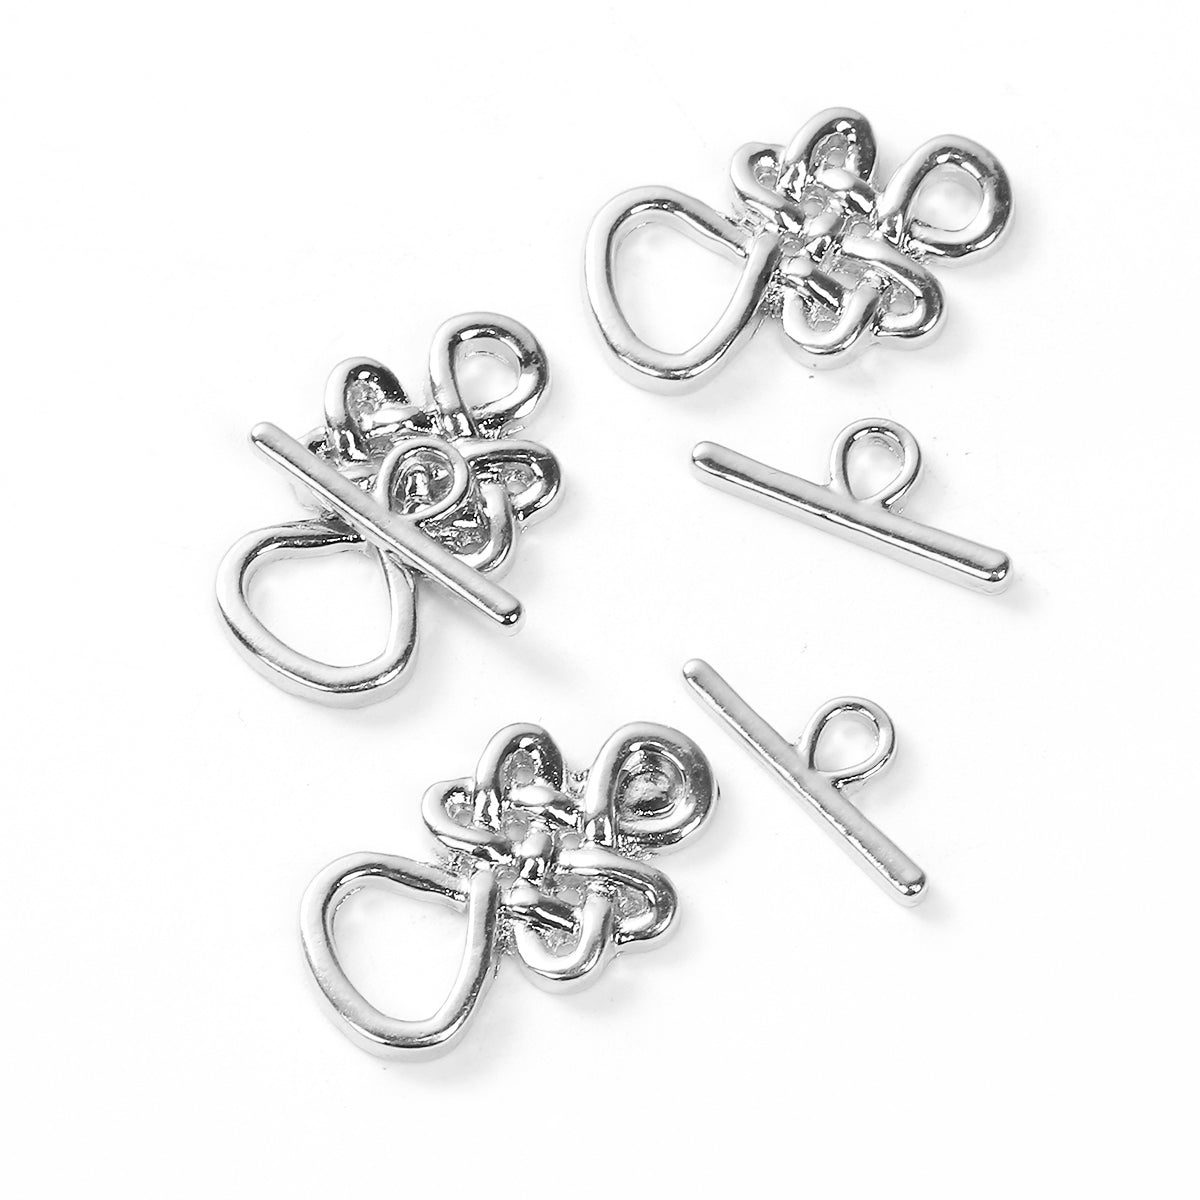 3.5 Large Ring of Silver Tone Metal Keys W/lobster Clasp Charm Pendant  Beads-bronze Tone Available 